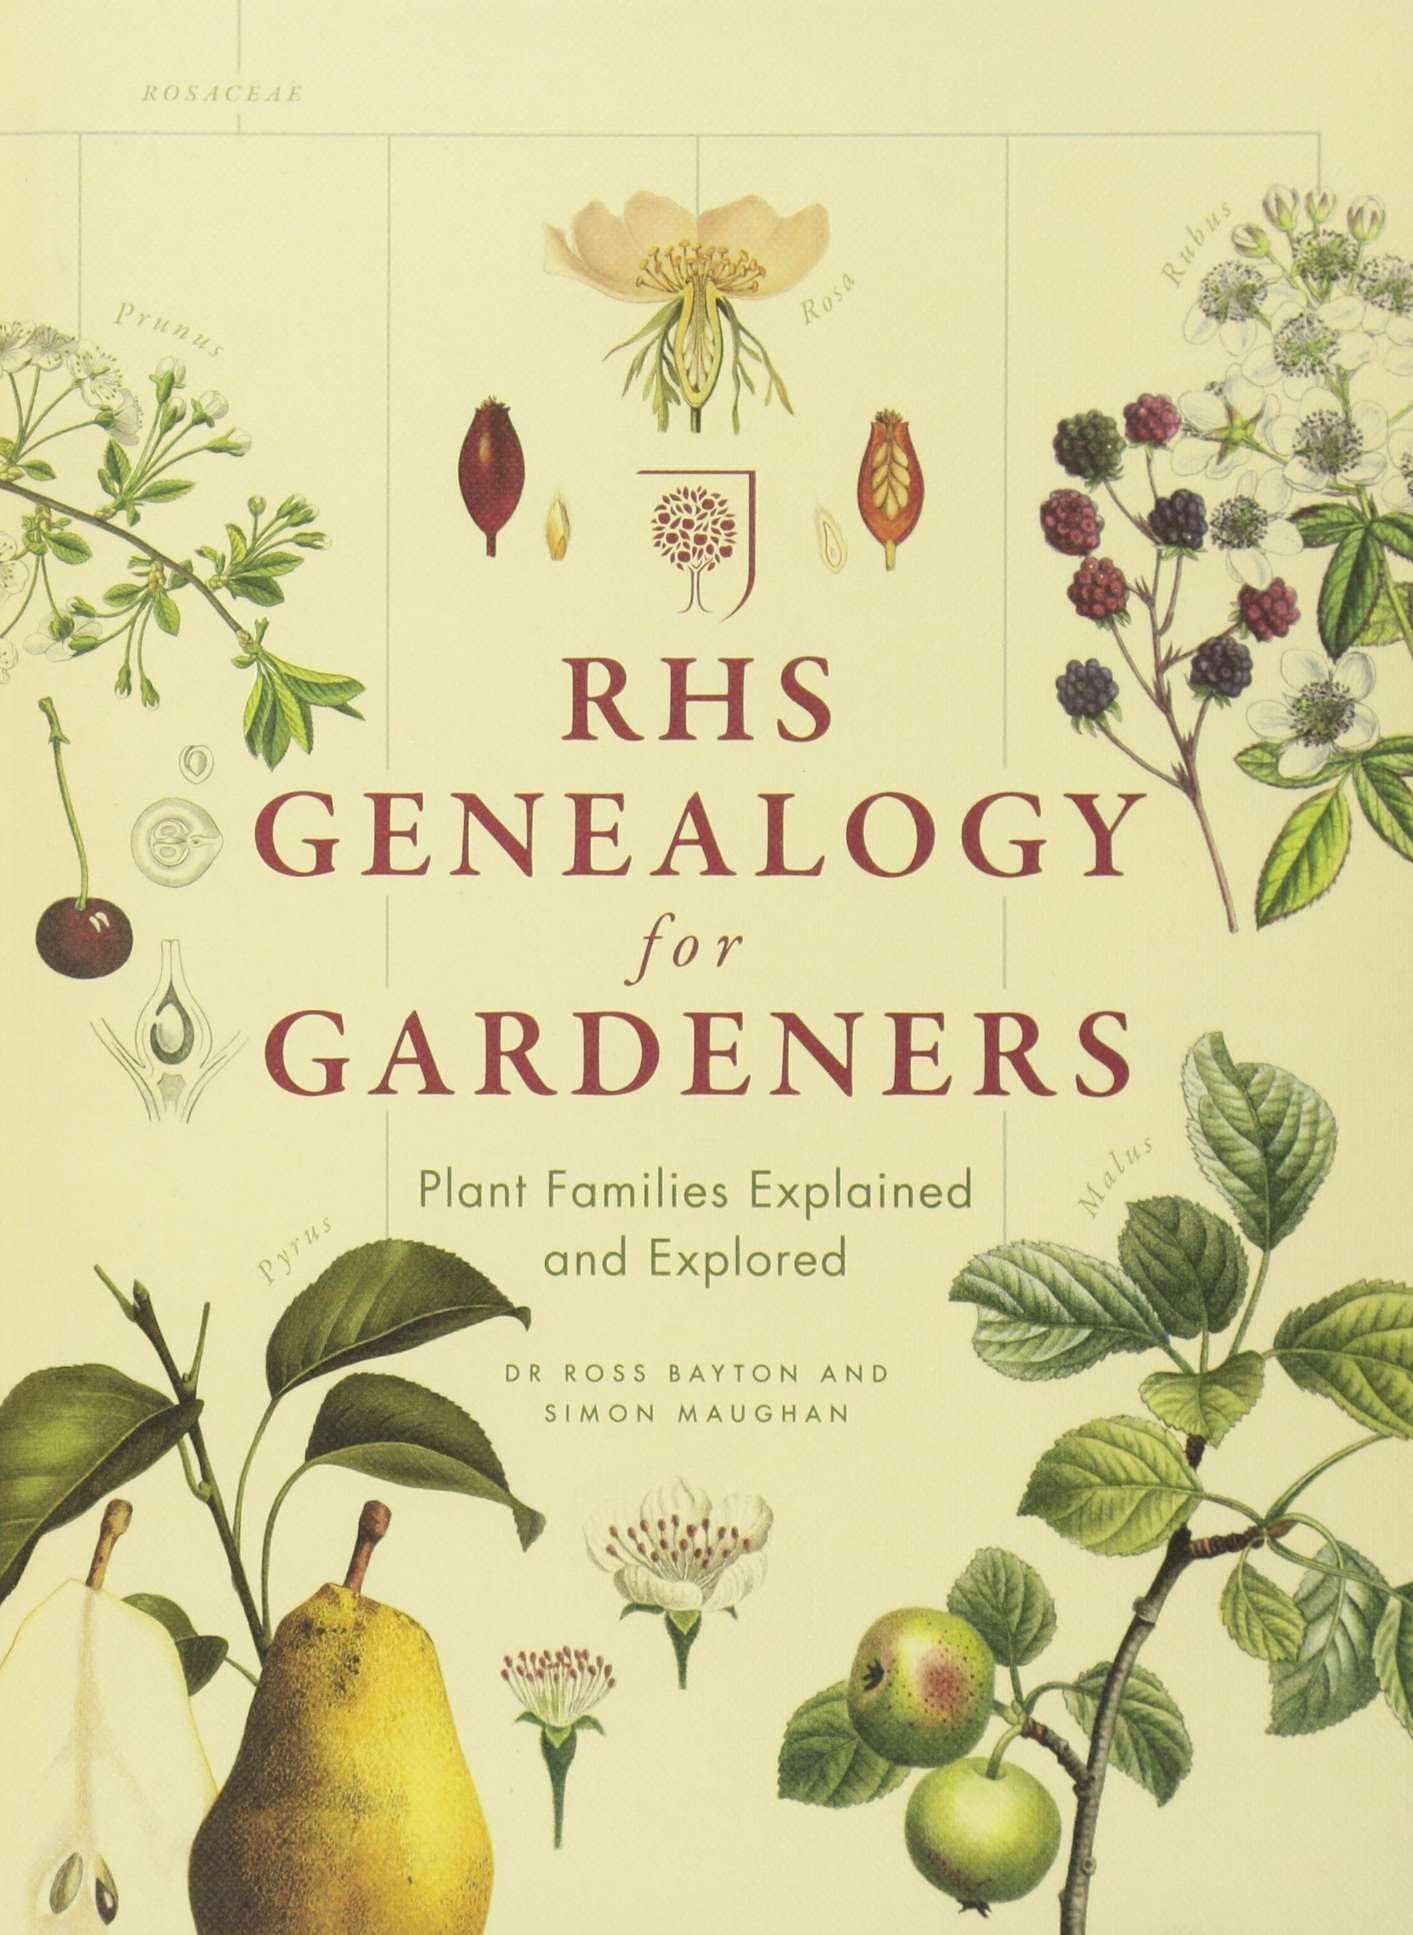 RHS GENEALOGY FOR GARDENERS. PLANT FAMILIES EXPLORED AND EXPLAINED